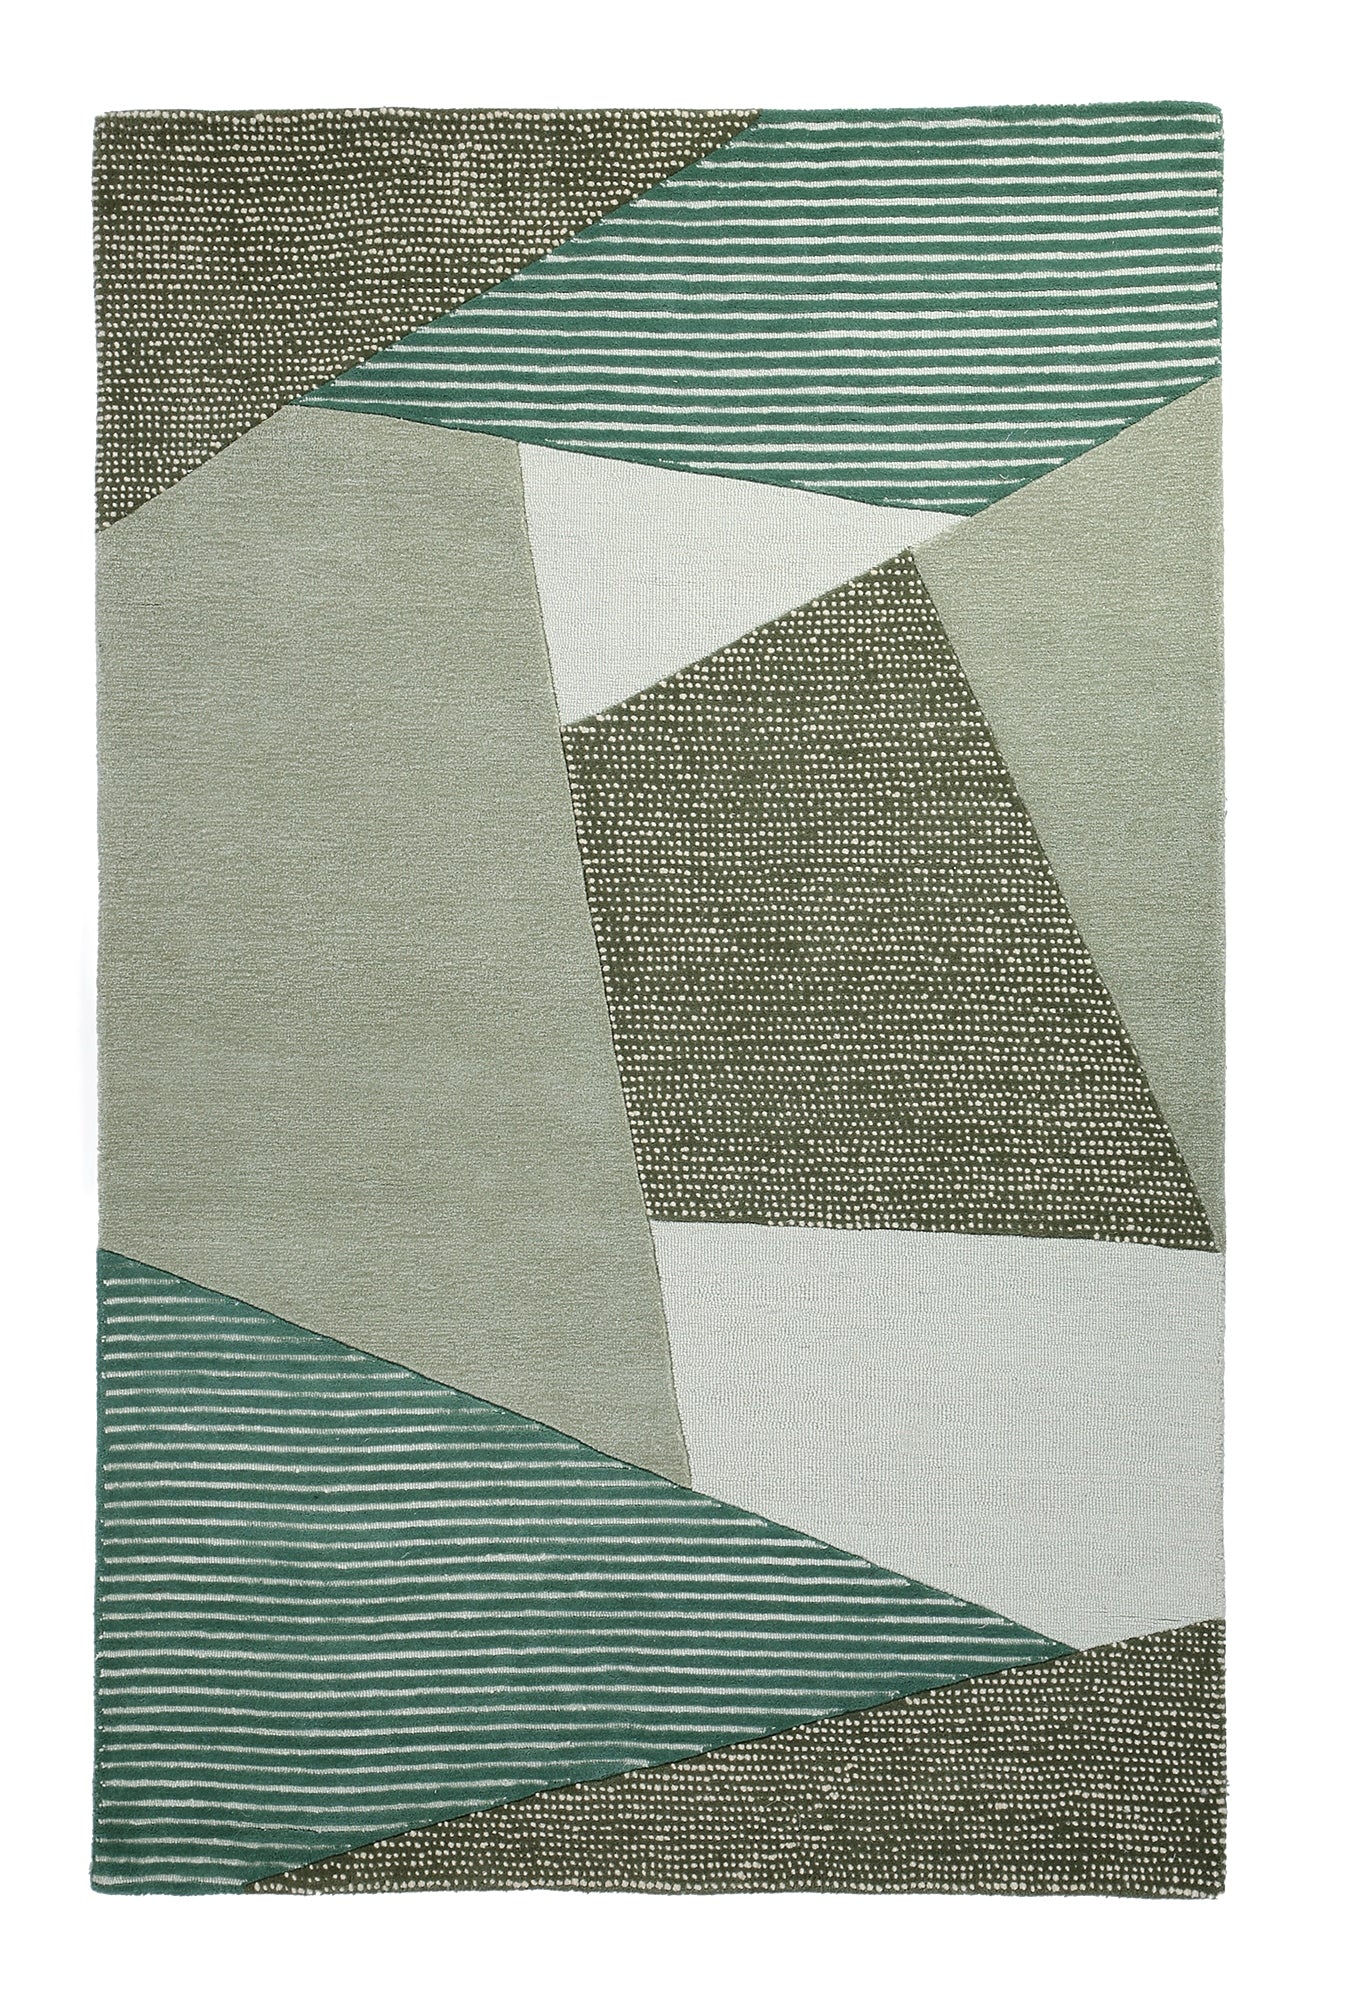 Green and Natural Hand Tufted Wool Rug - 5'x8'